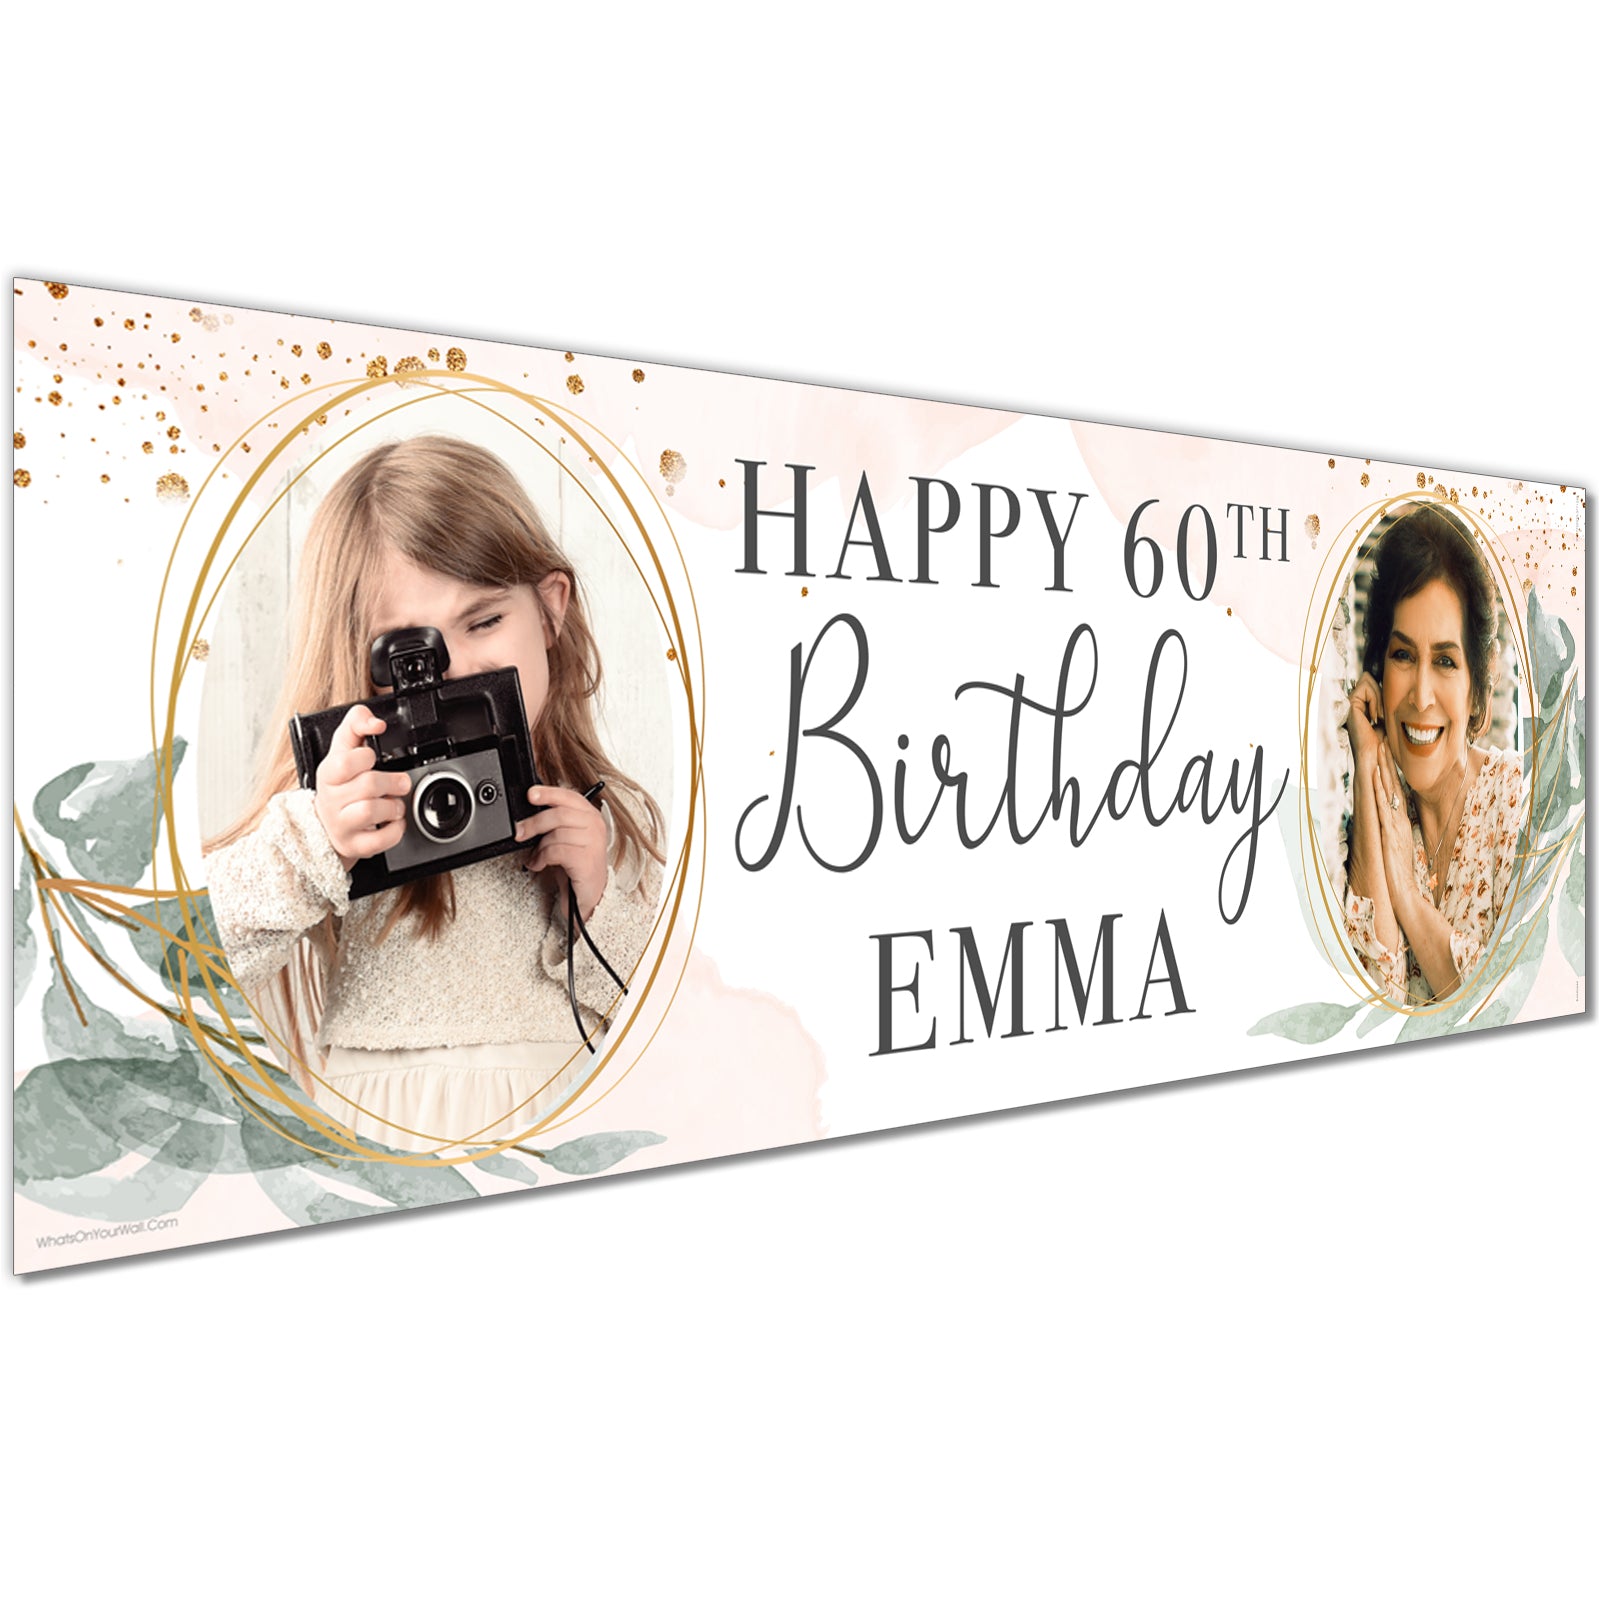 Personalised Birthday Banners in Party Blue Balloons design